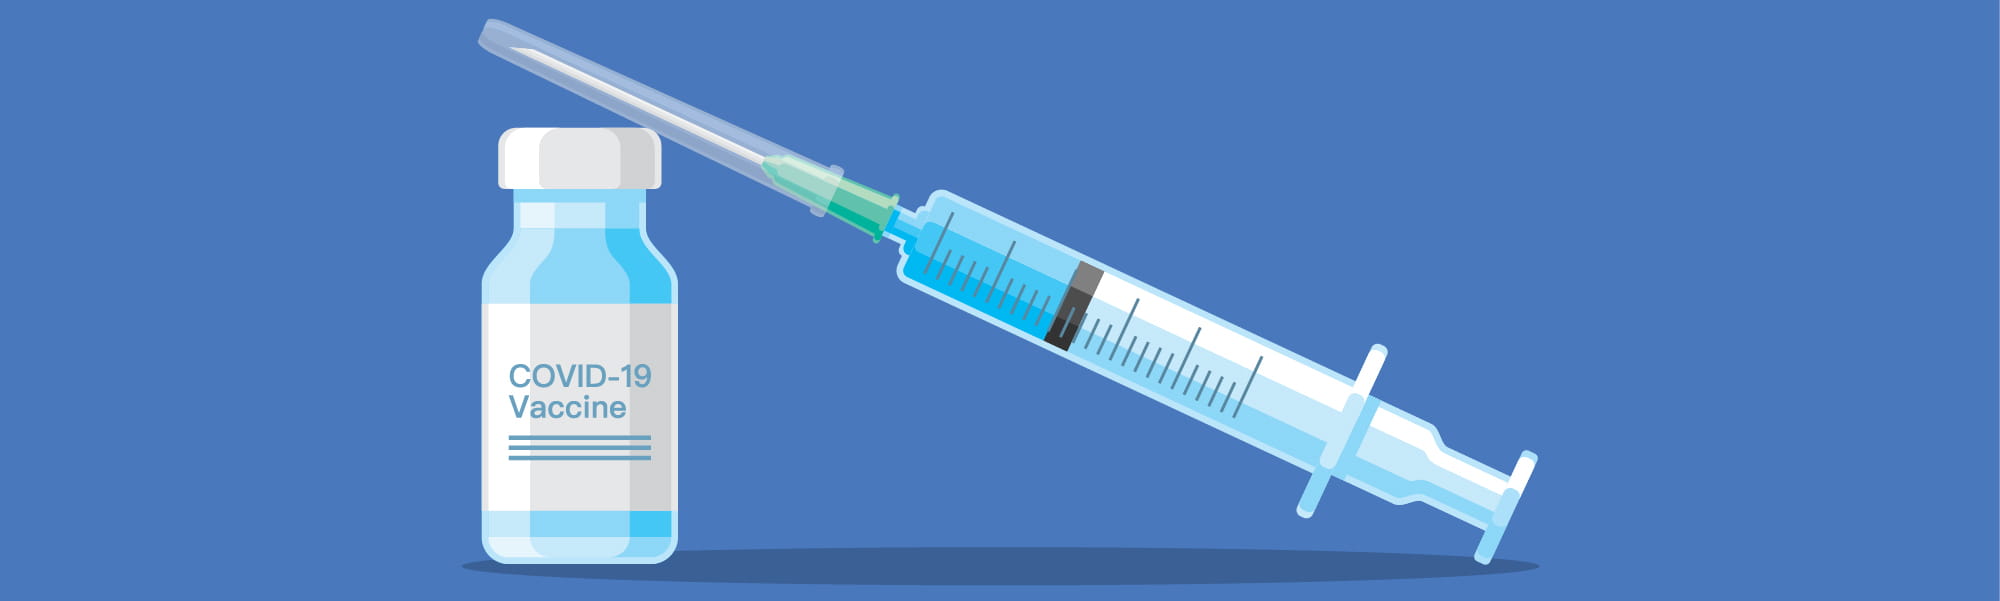 covid vaccine bottle and needle